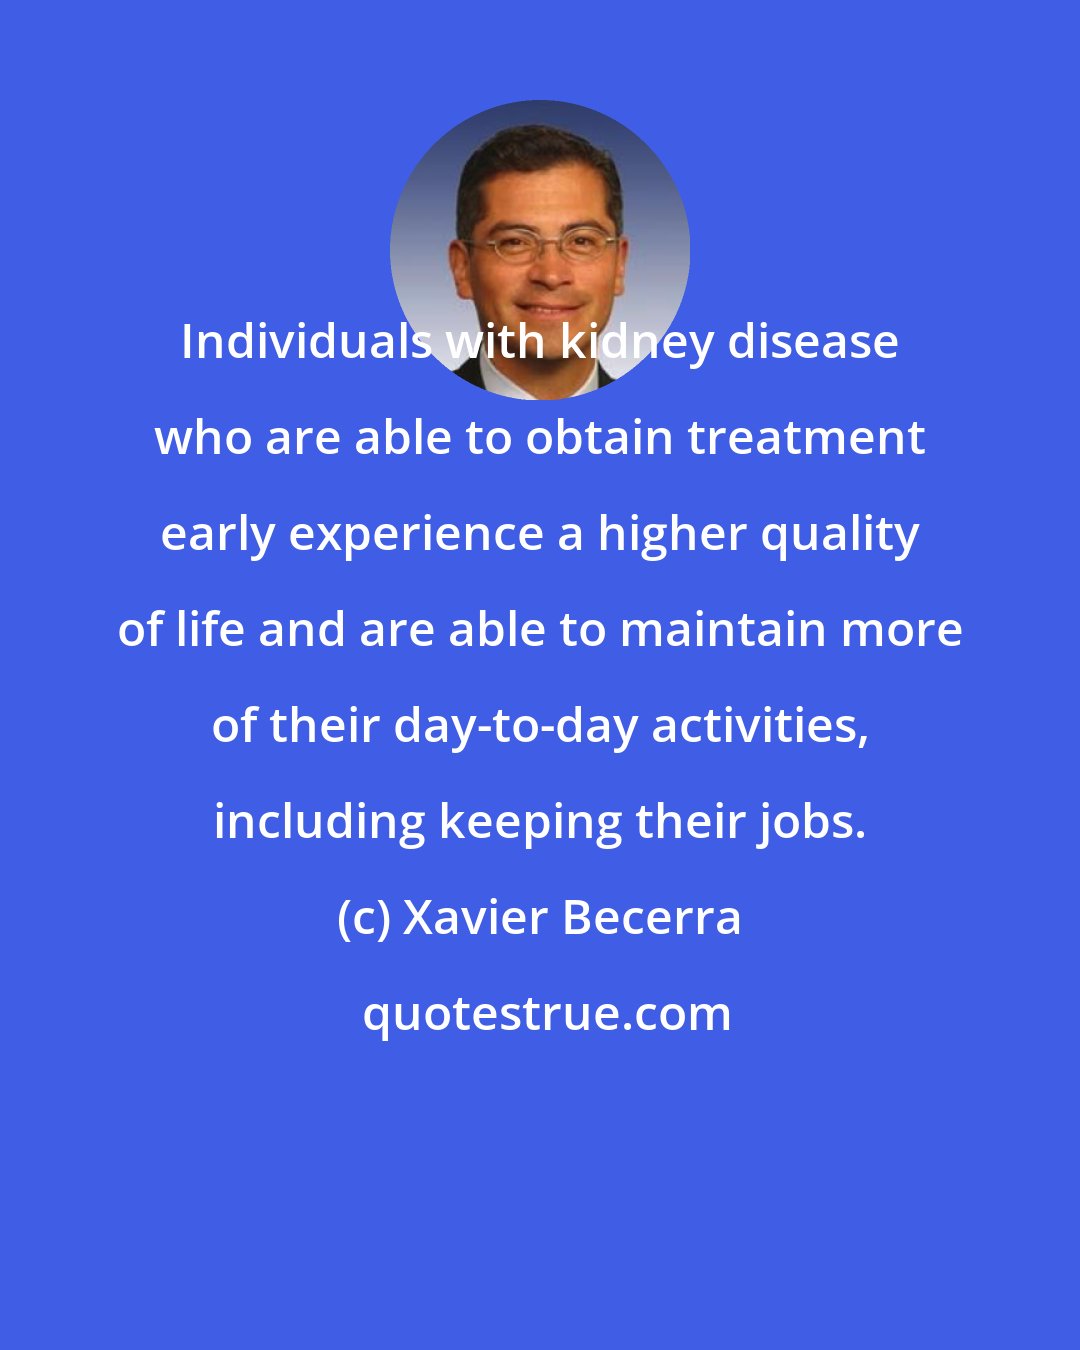 Xavier Becerra: Individuals with kidney disease who are able to obtain treatment early experience a higher quality of life and are able to maintain more of their day-to-day activities, including keeping their jobs.